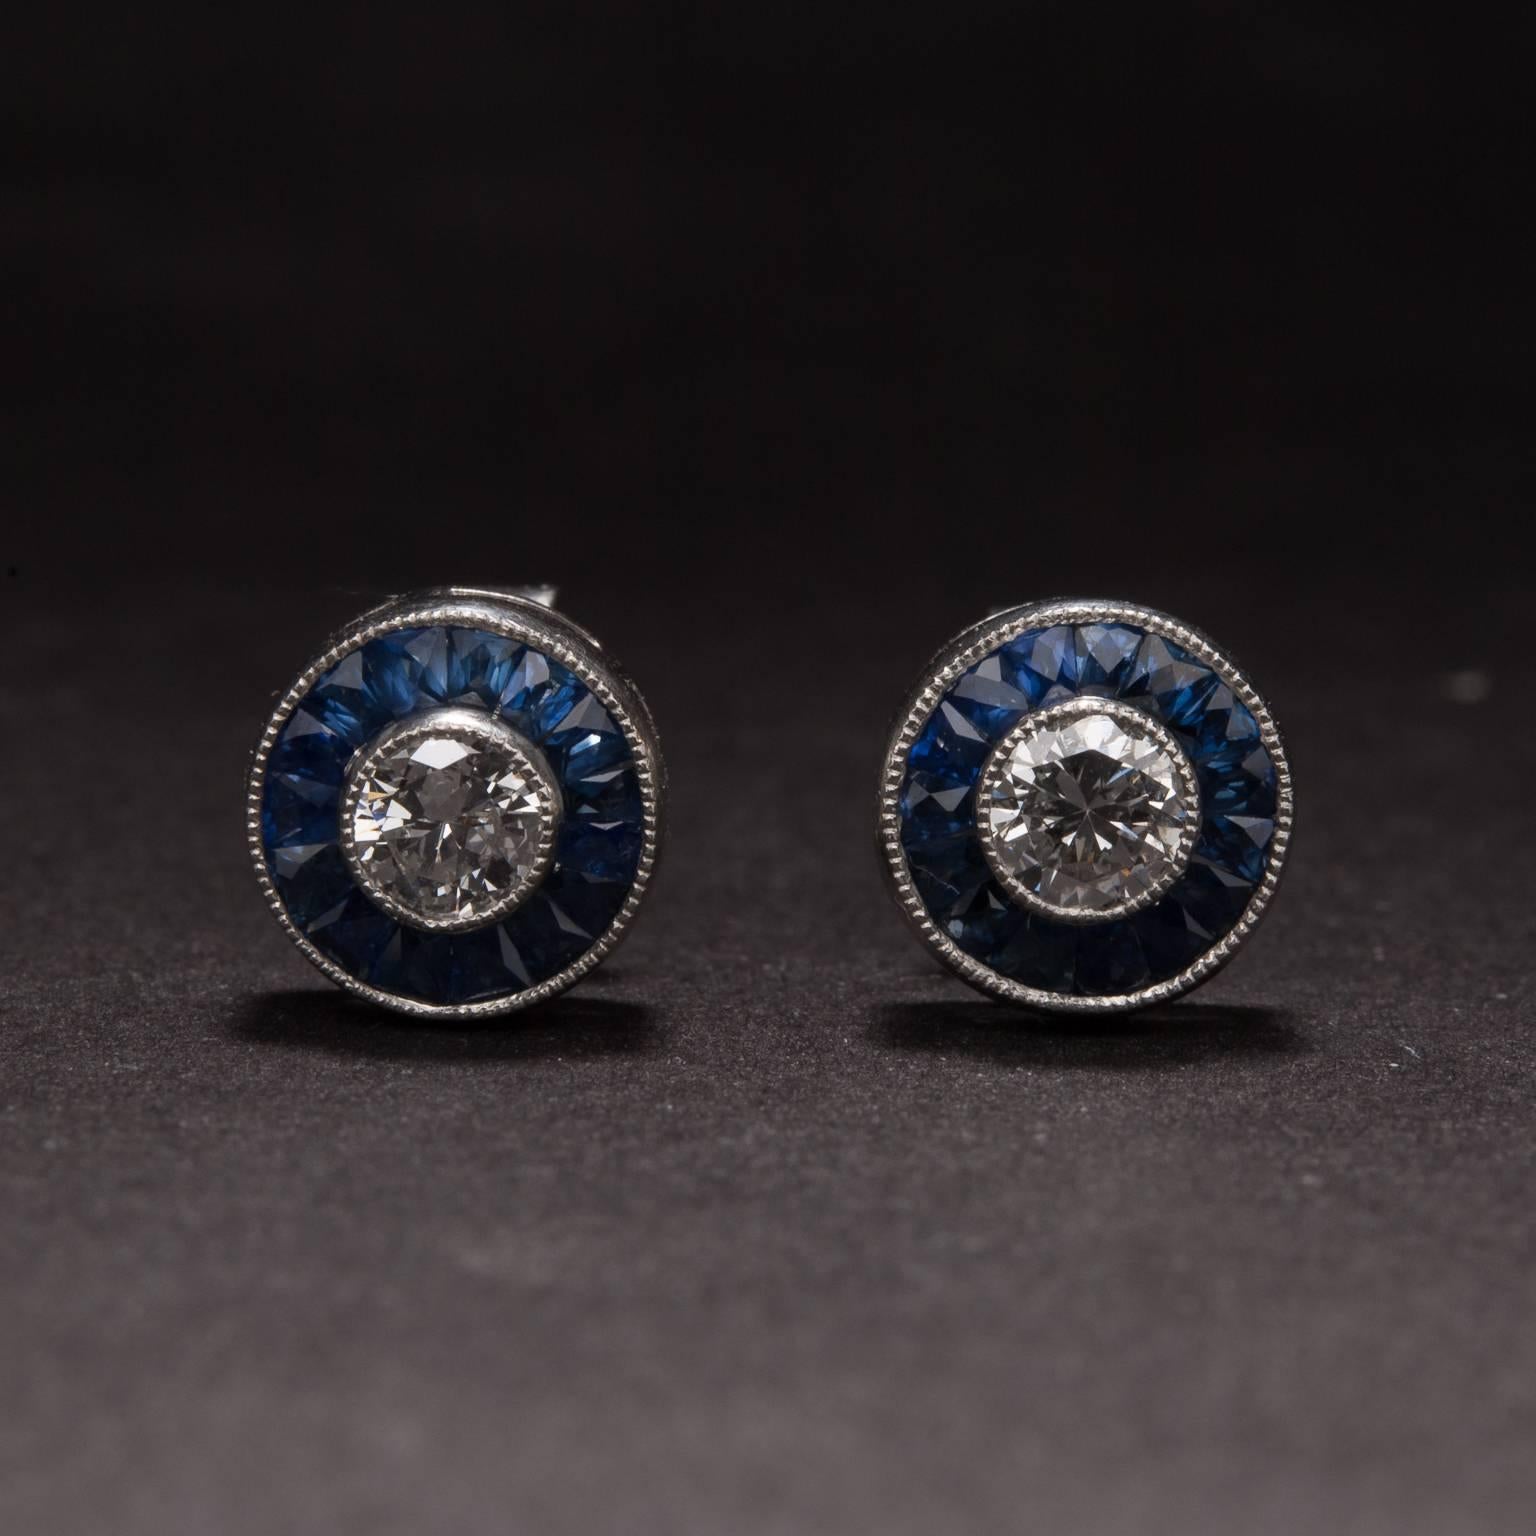 This lovely pair of stud earrings features .40 total carats of diamonds and .50 total carats of french cut channel set sapphires. These earrings are made in platinum and measure 7.8 mm in diameter.